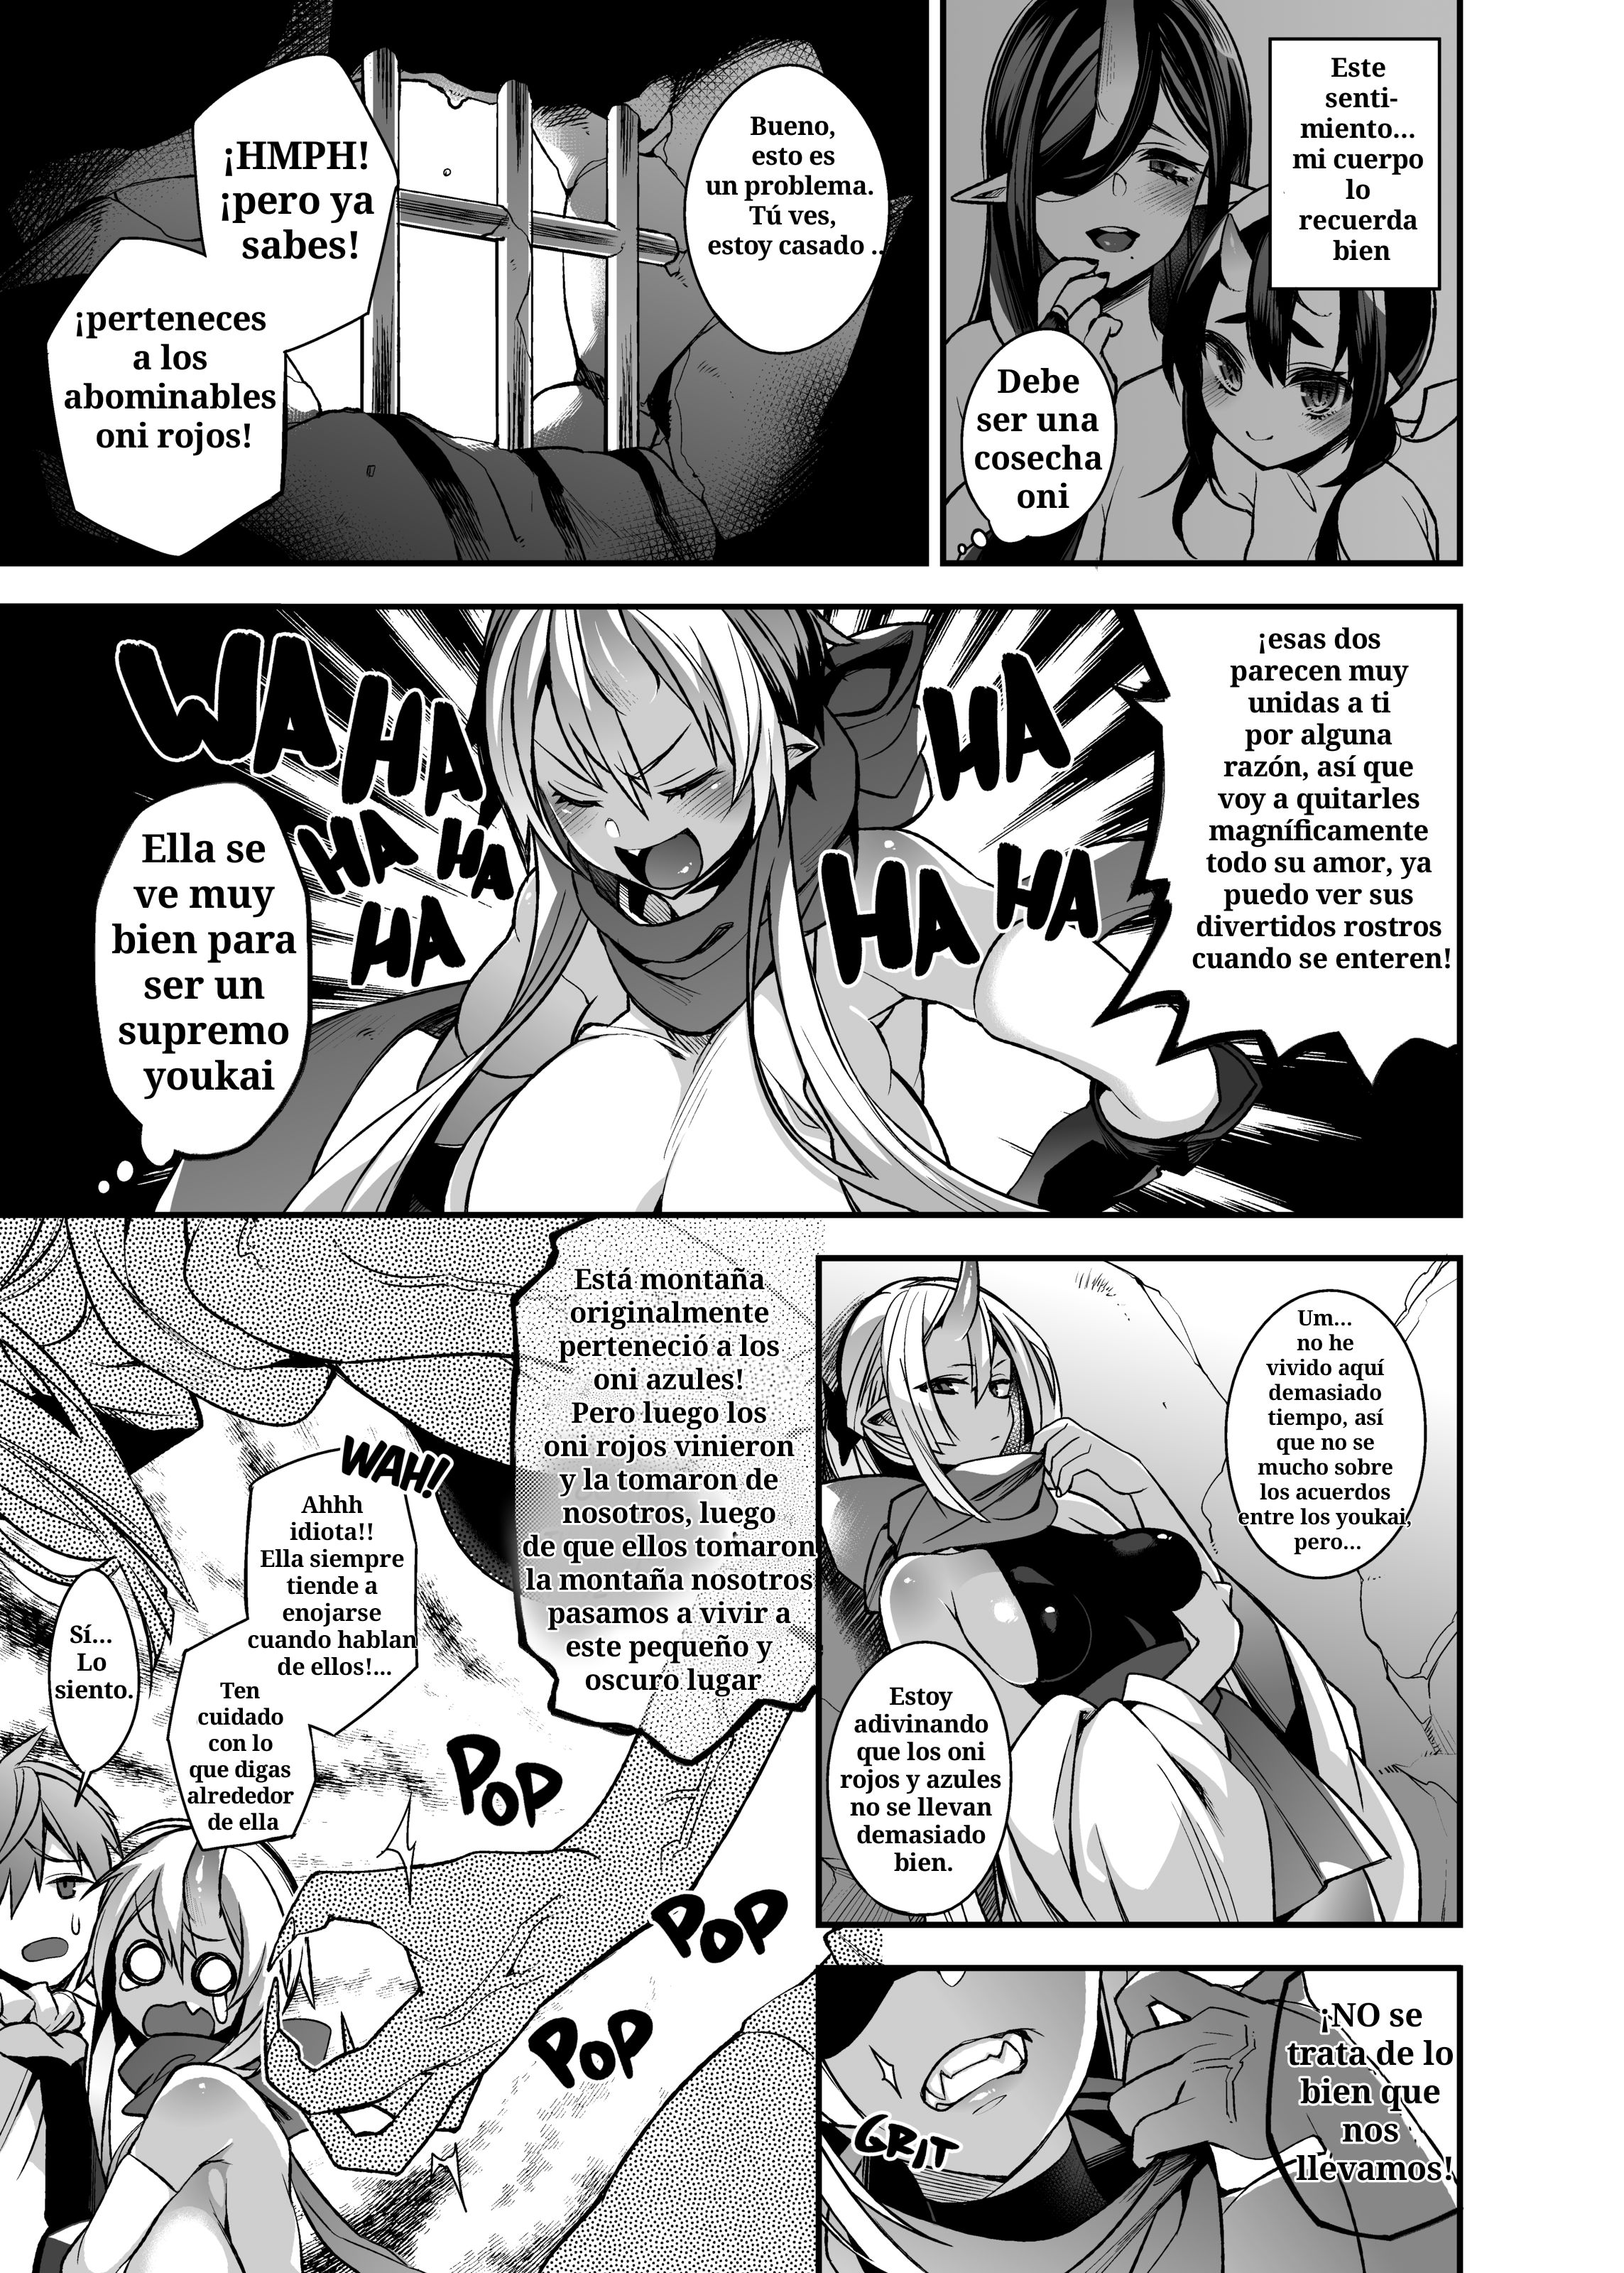 Mating with Oni part 4 1 de 3 - 7